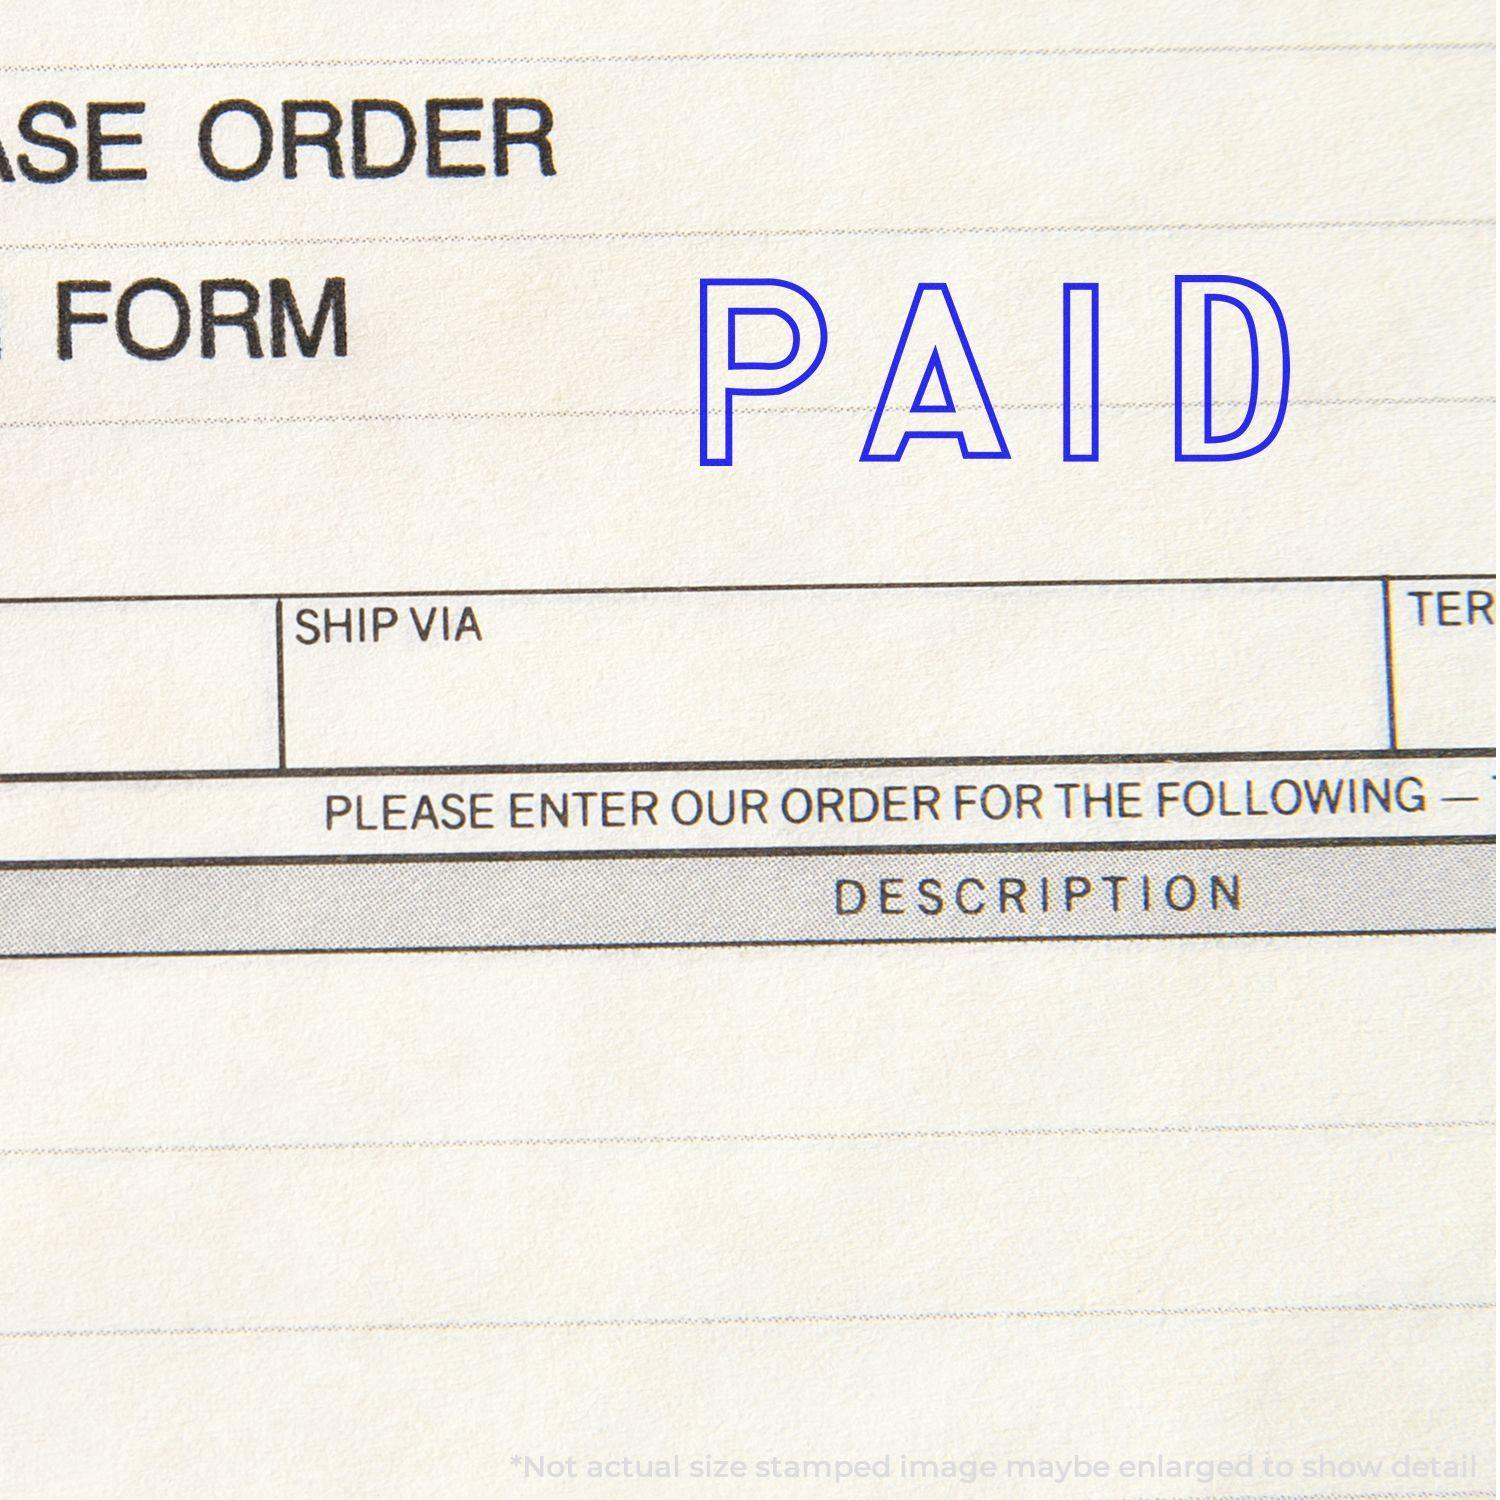 A stock office rubber stamp with a stamped image showing how the text "PAID" in an outline font is displayed after stamping.